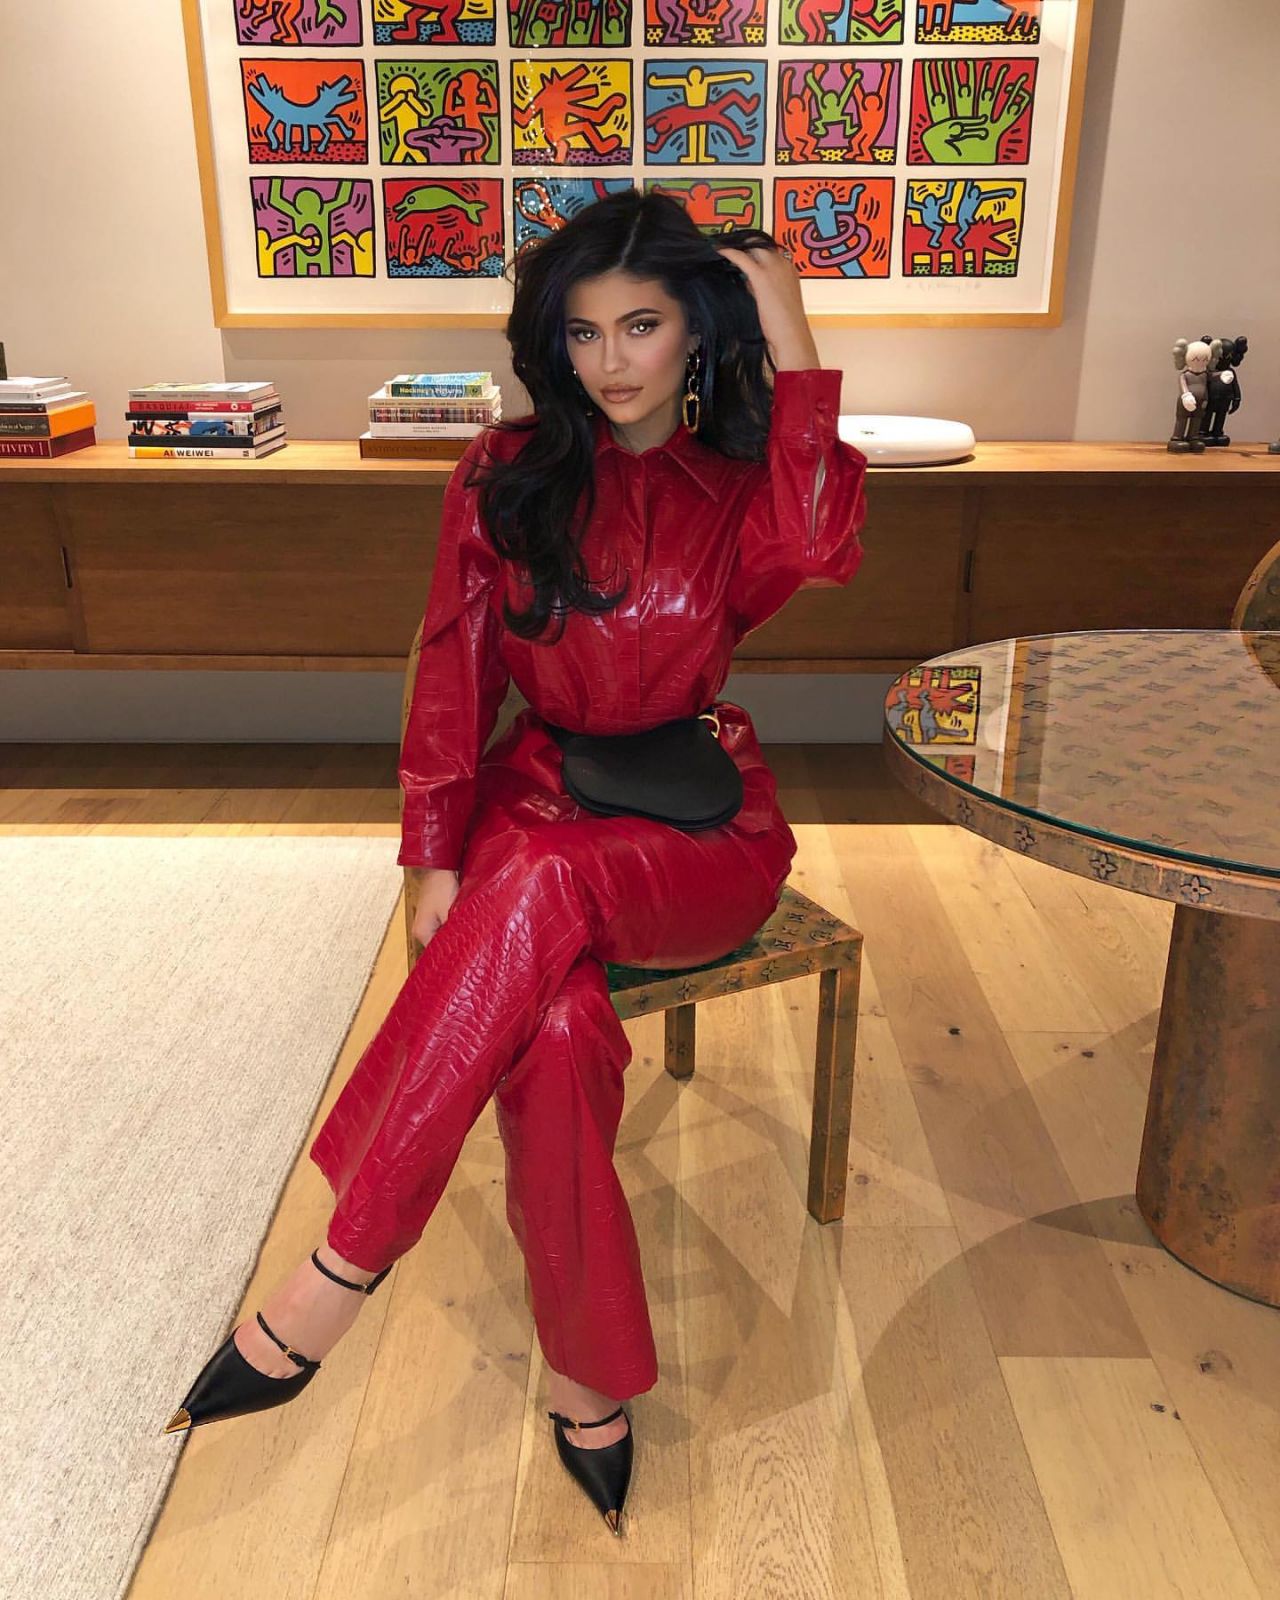 Kylie Jenner Gorgeous In Sexy Red Outfit And Heels Social Media Photos Celeblr